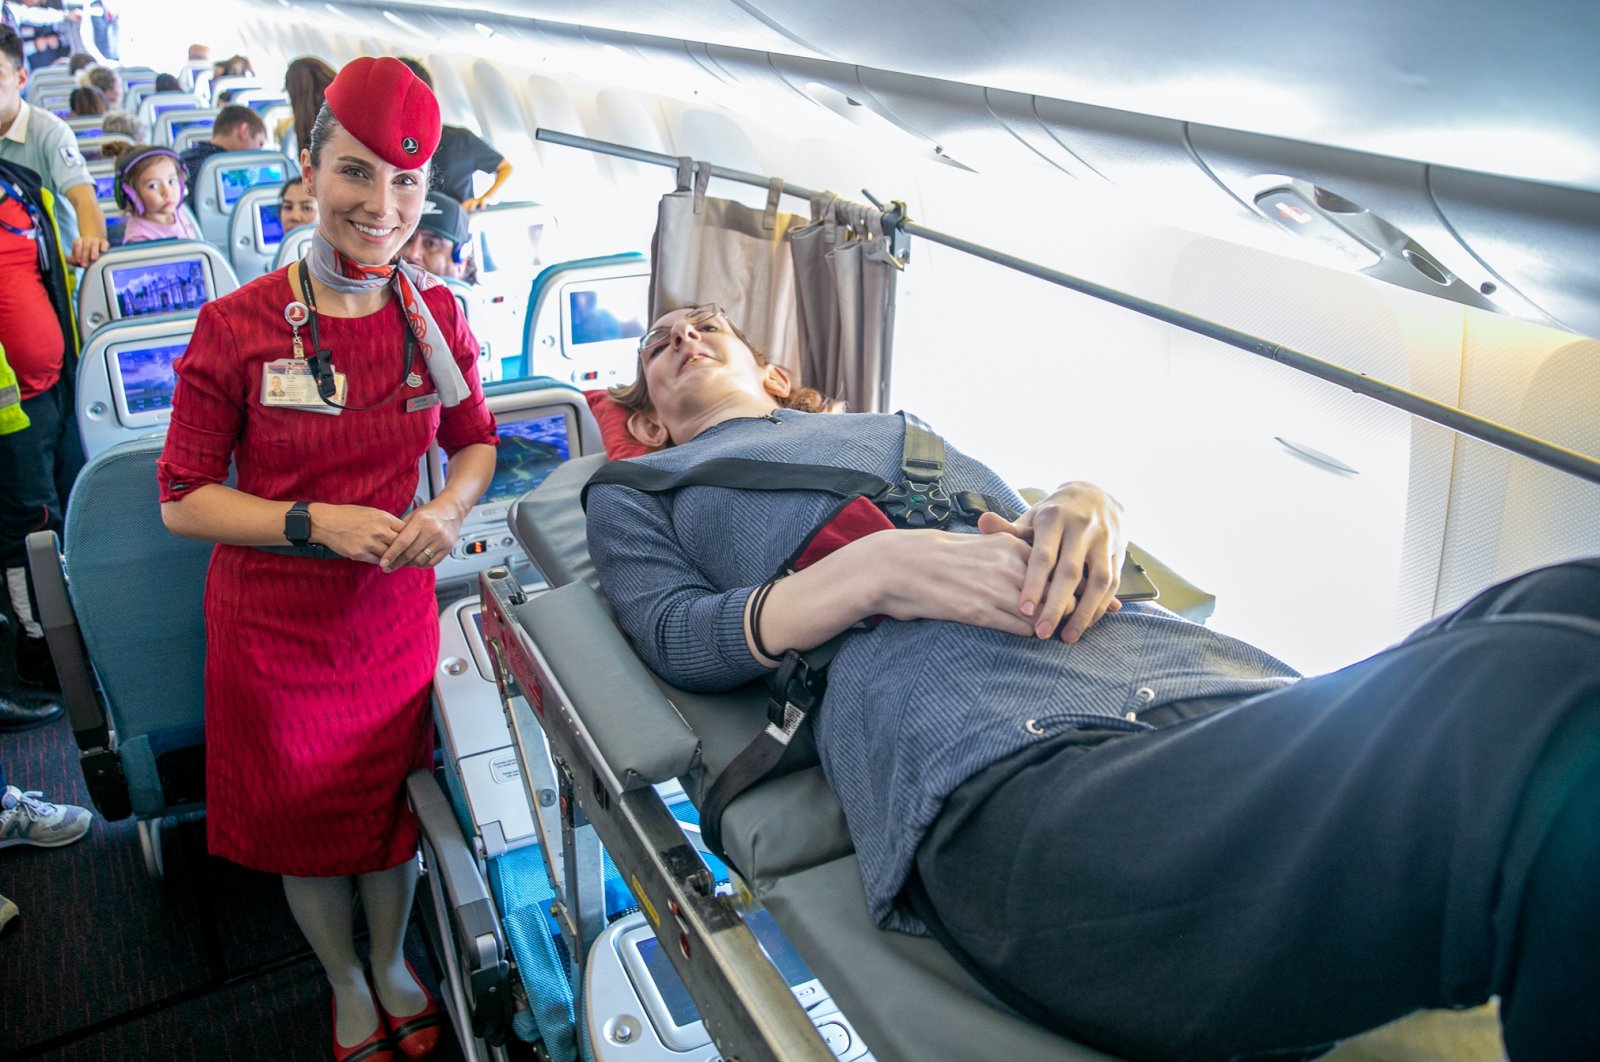 turkish-airlines-helps-world-s-tallest-woman-fly-for-first-time